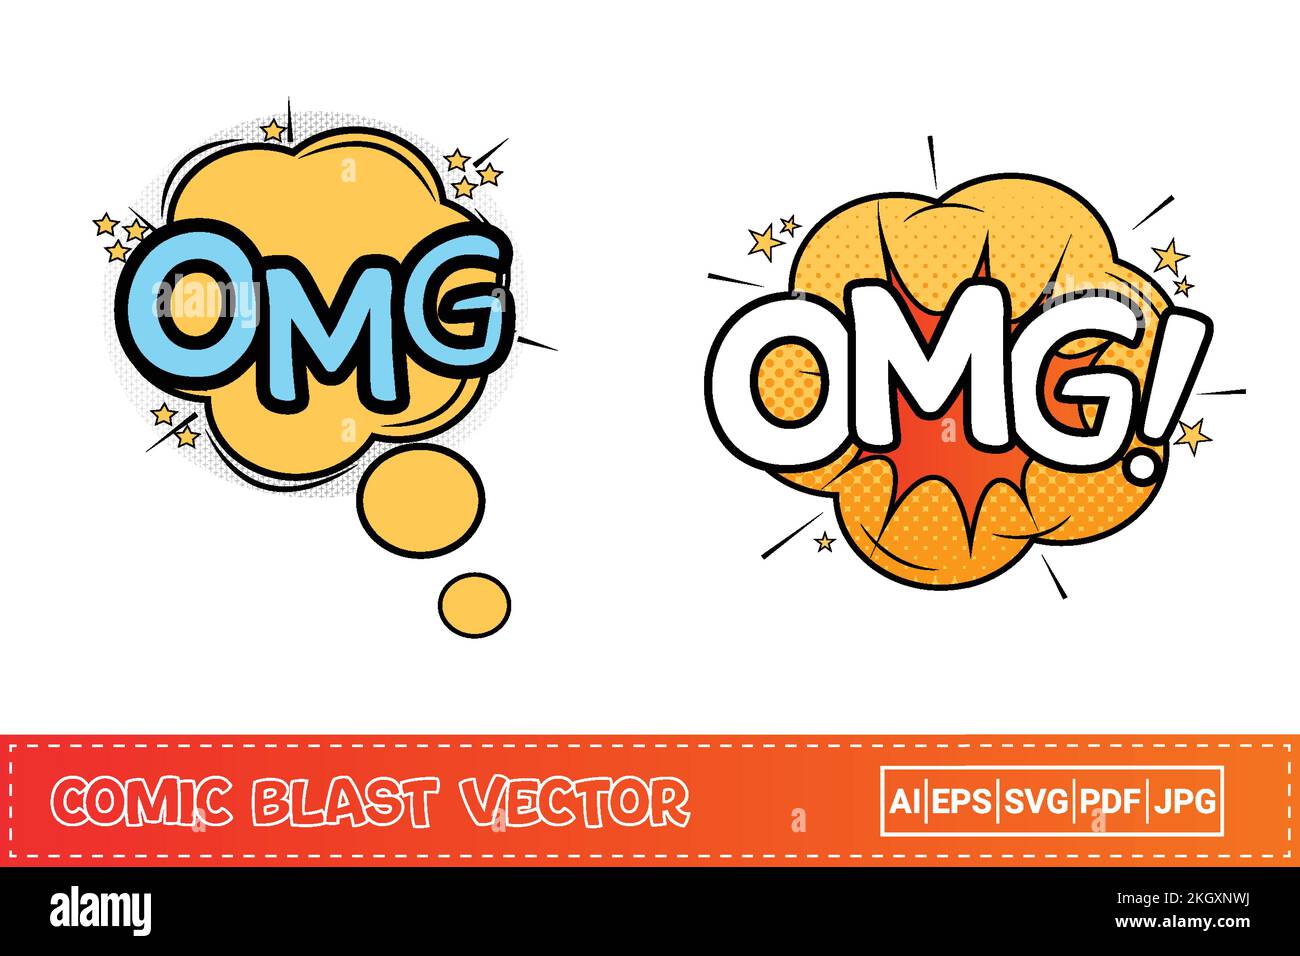 OMG comic explosion with yellow and blue color. OMG comic blast with orange, yellow, and white colors. Comic burst explosion with stars. OMG explosion Stock Vector